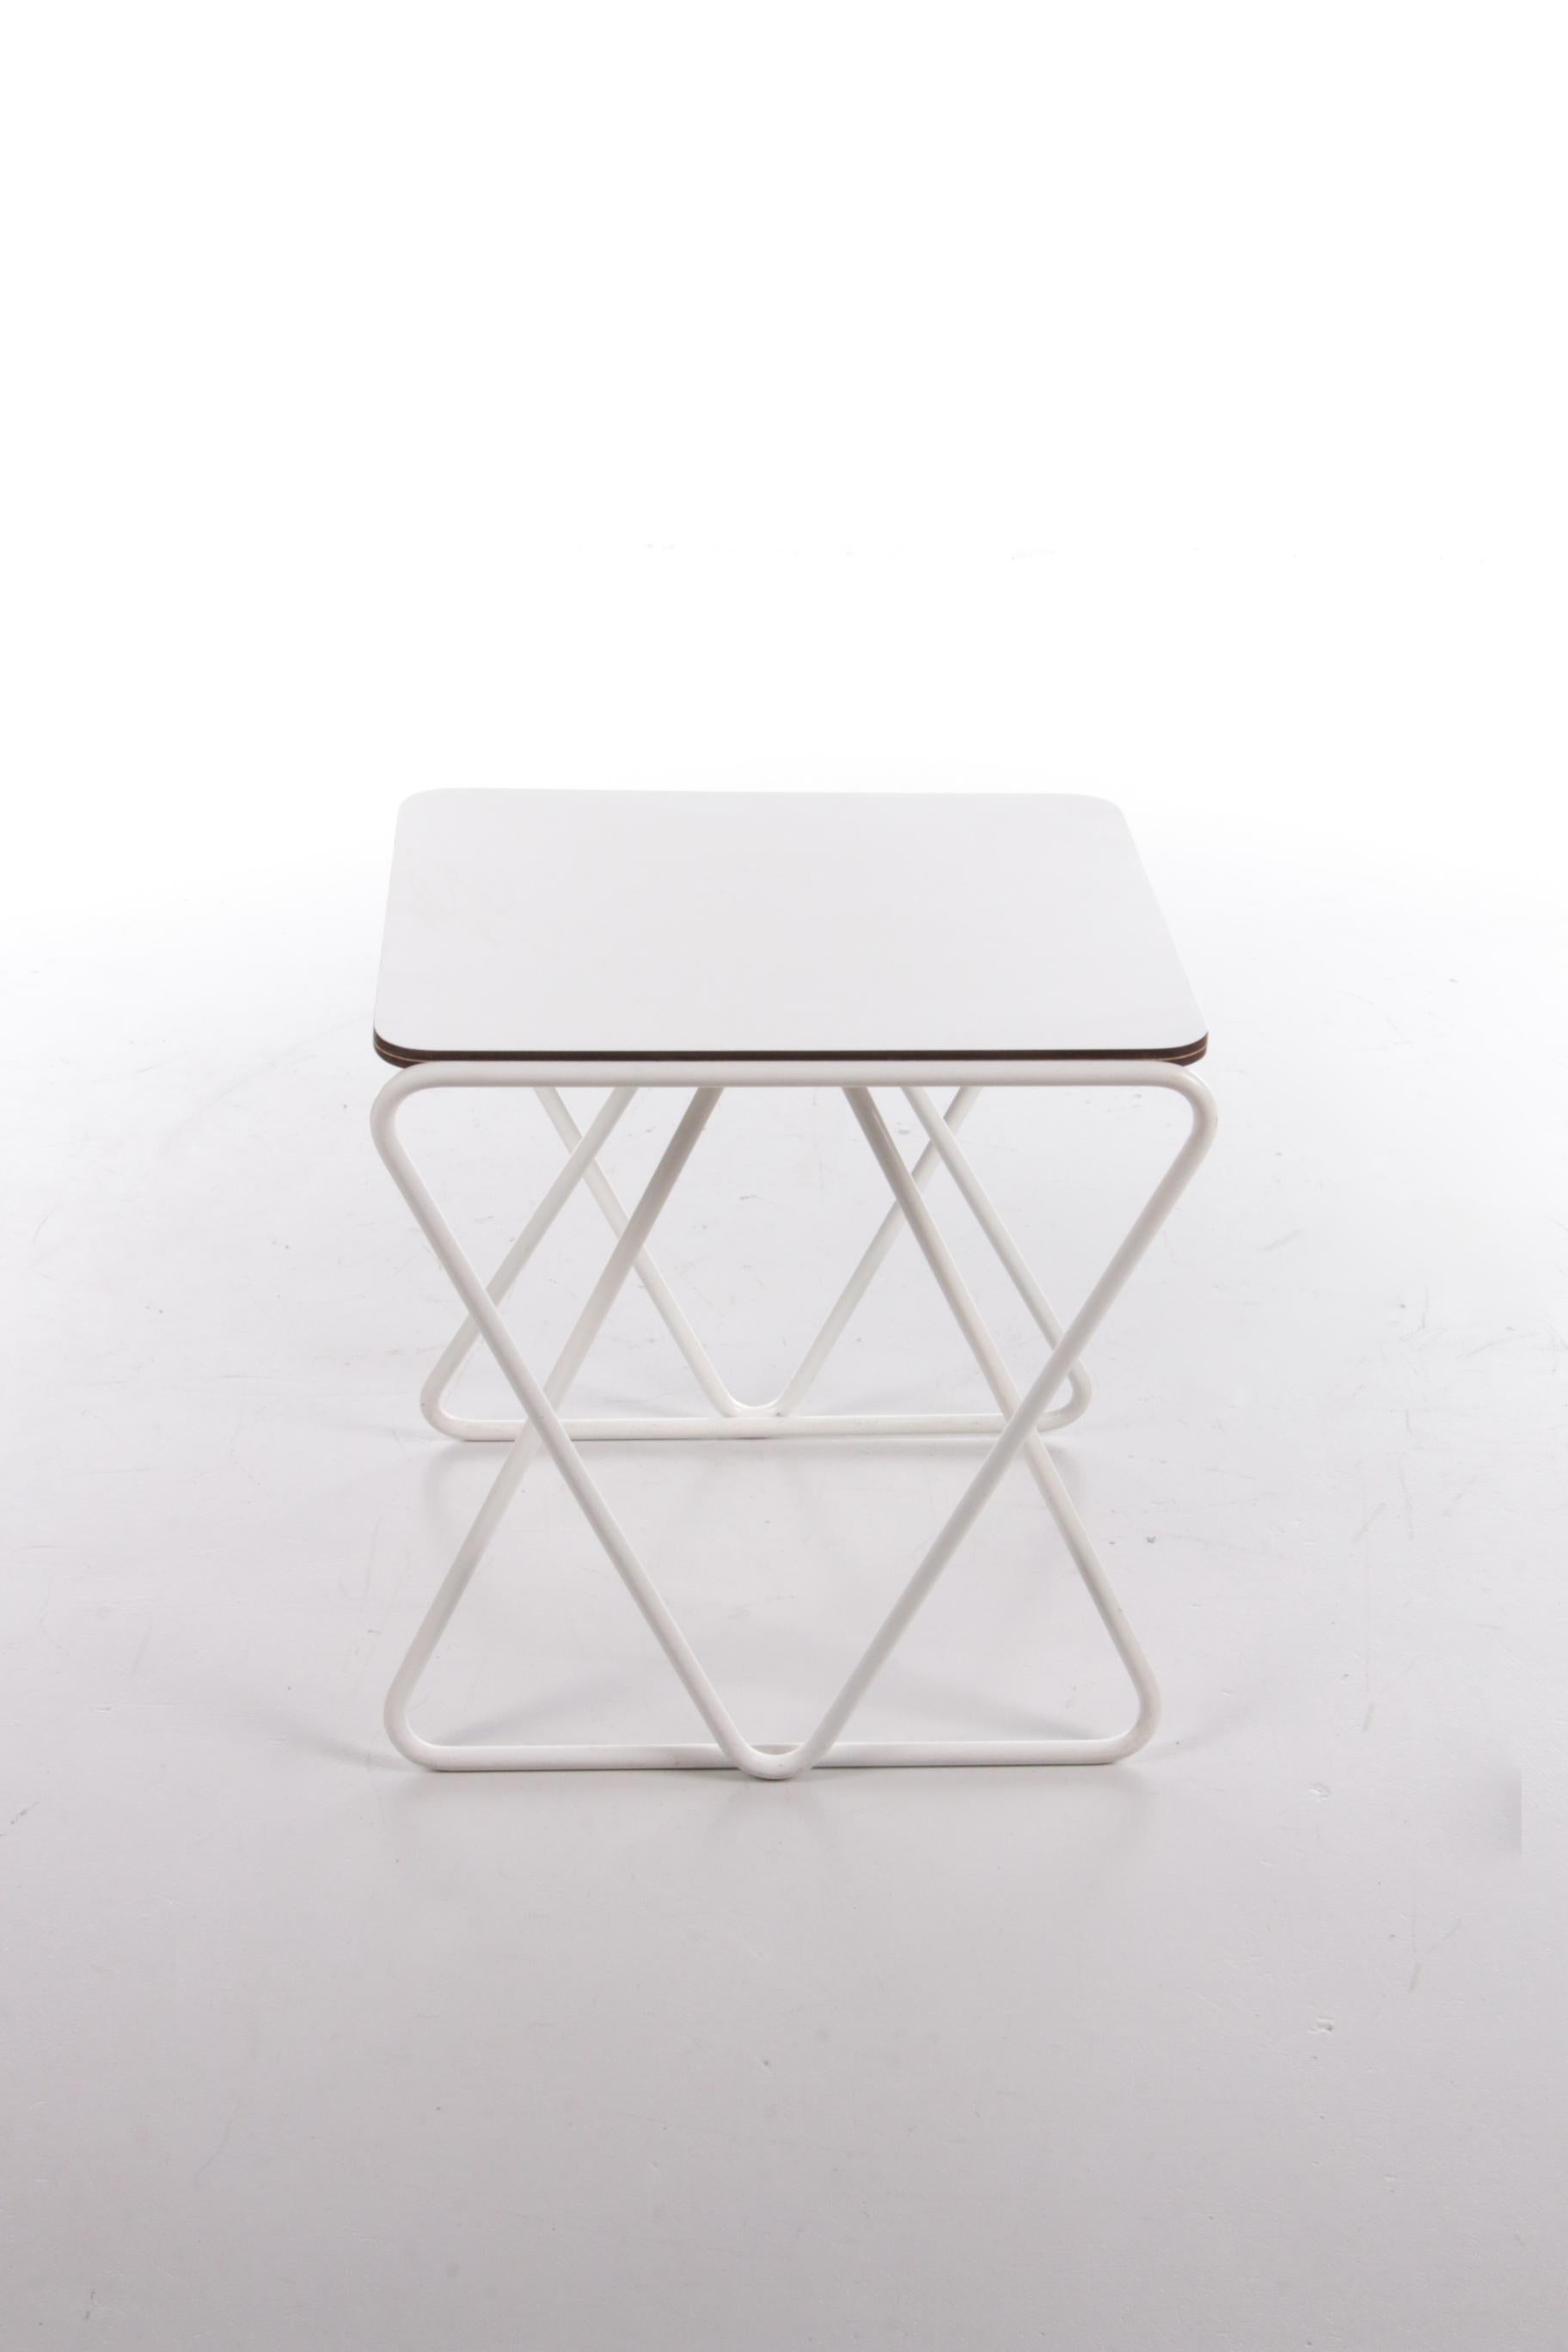 Late 20th Century Walter Antonis Side Table for I-Form Holland, 1978 For Sale